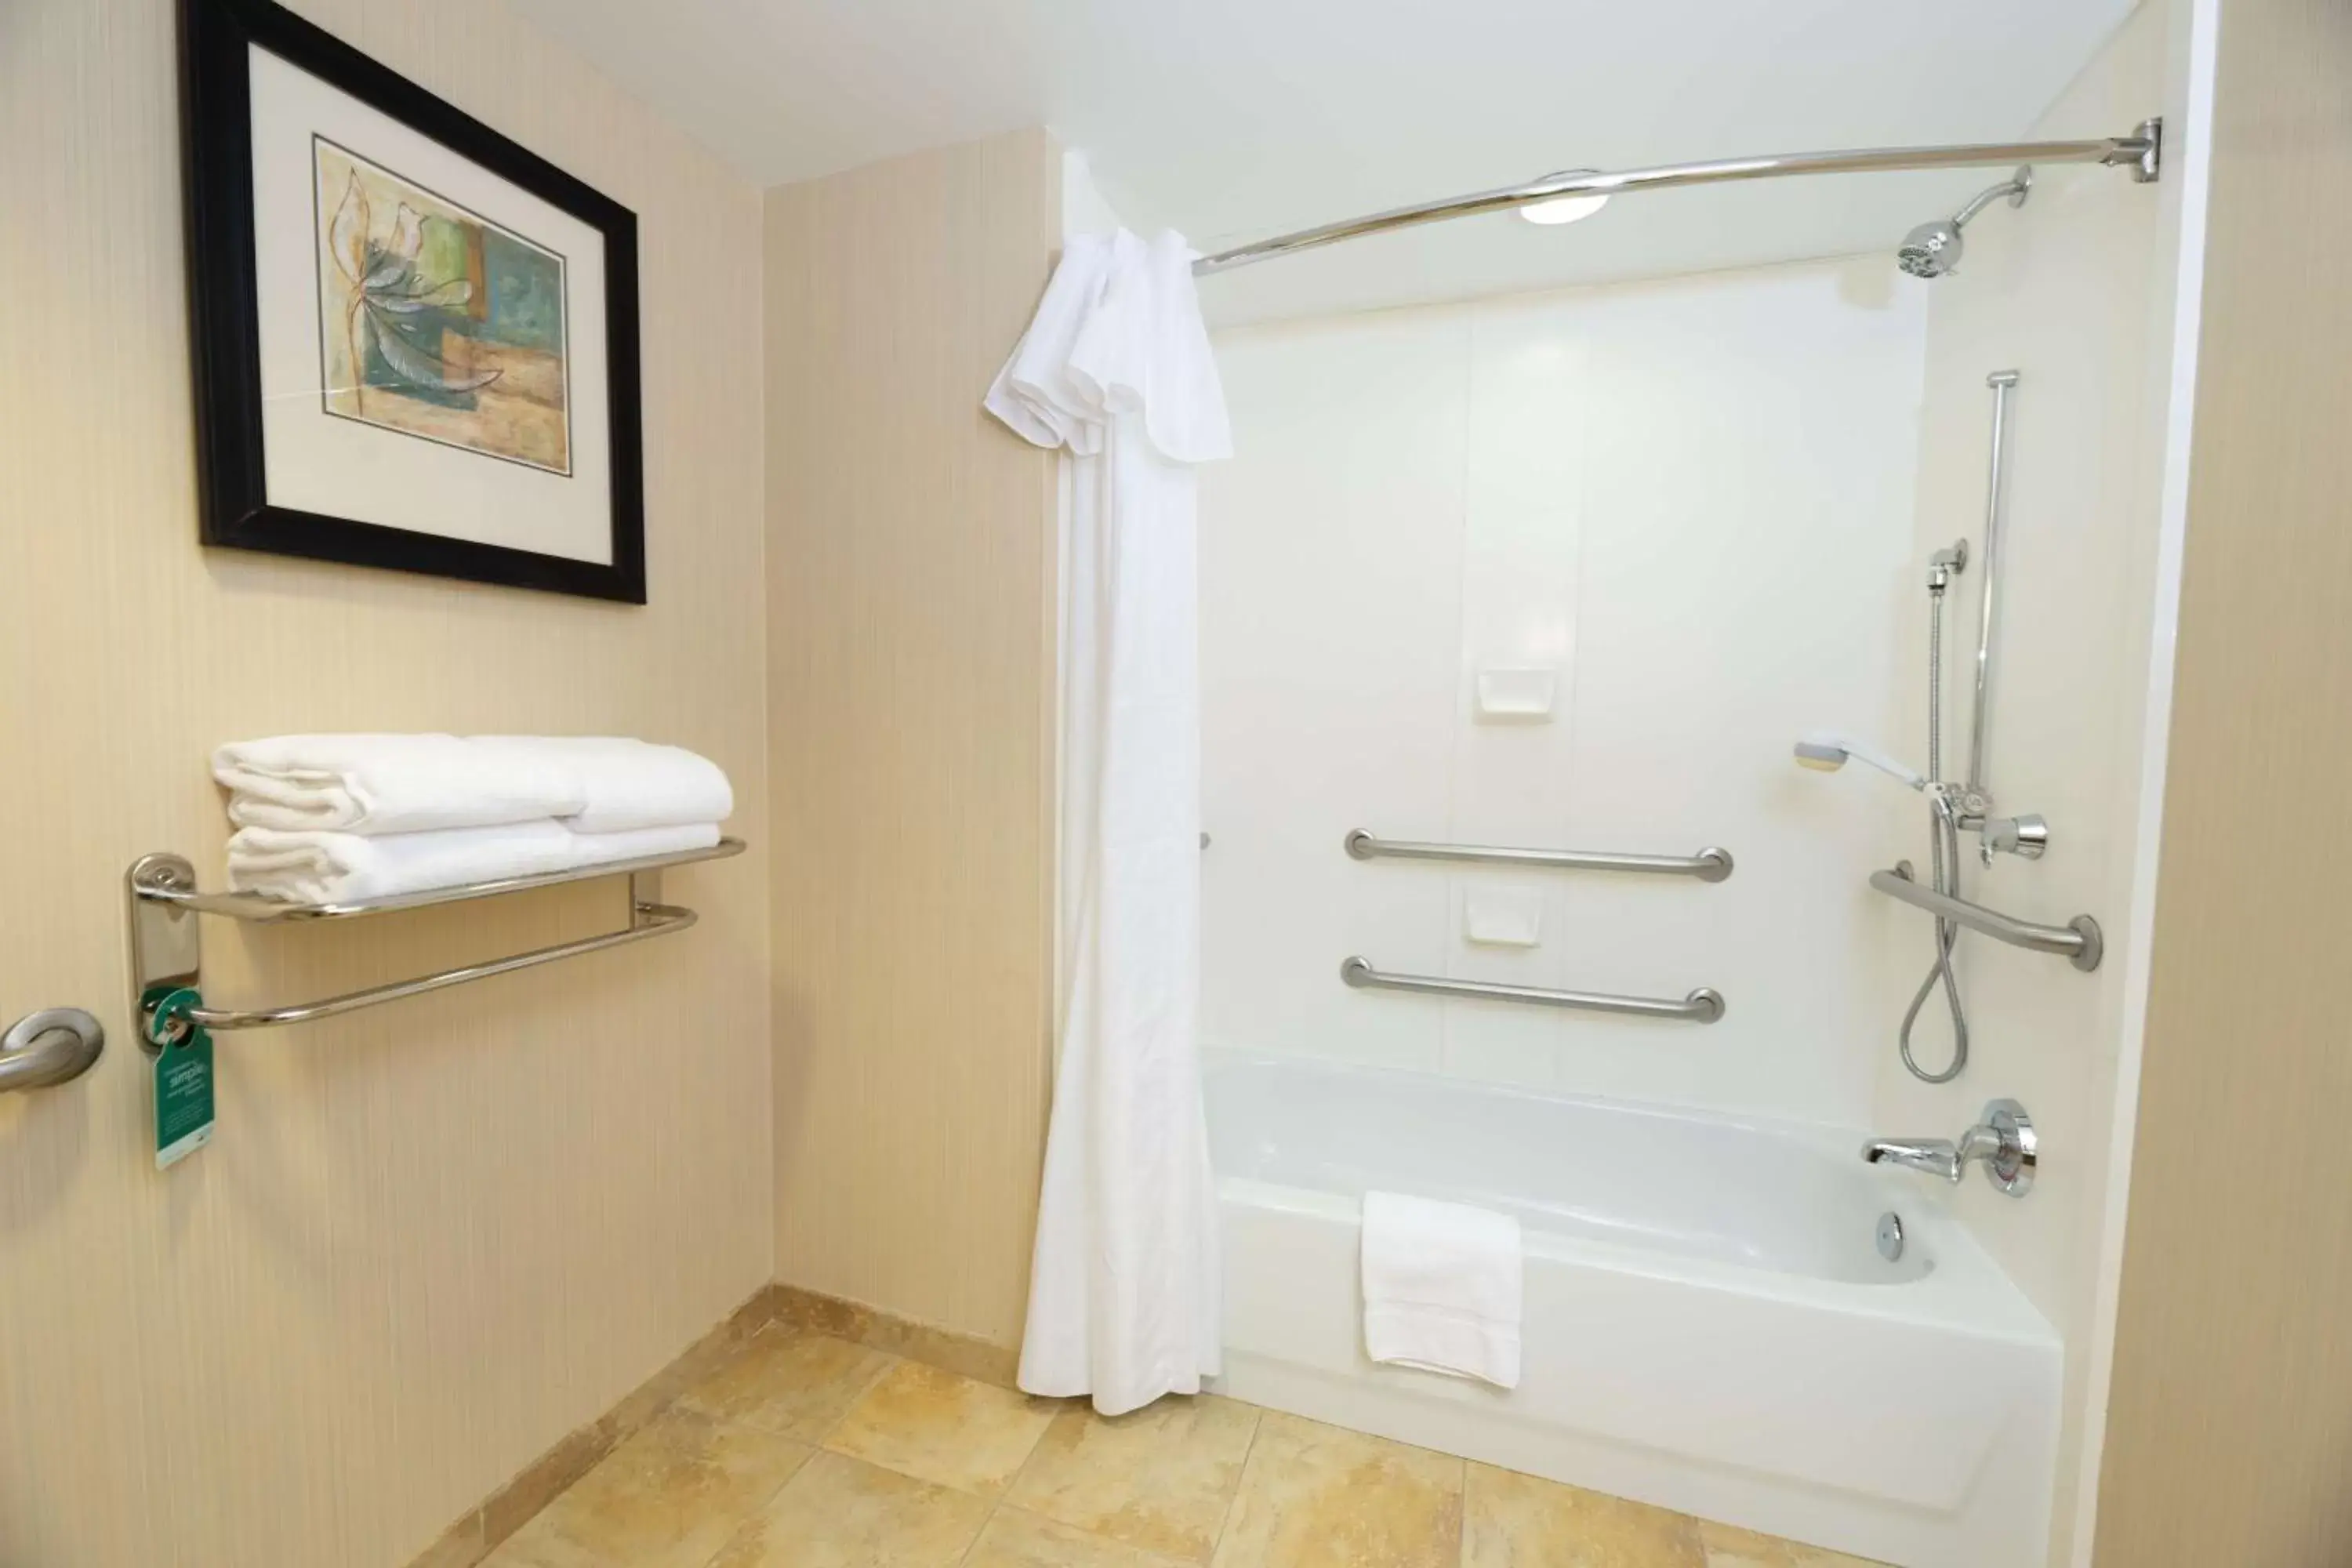 Bathroom in Homewood Suites by Hilton Lawrenceville Duluth